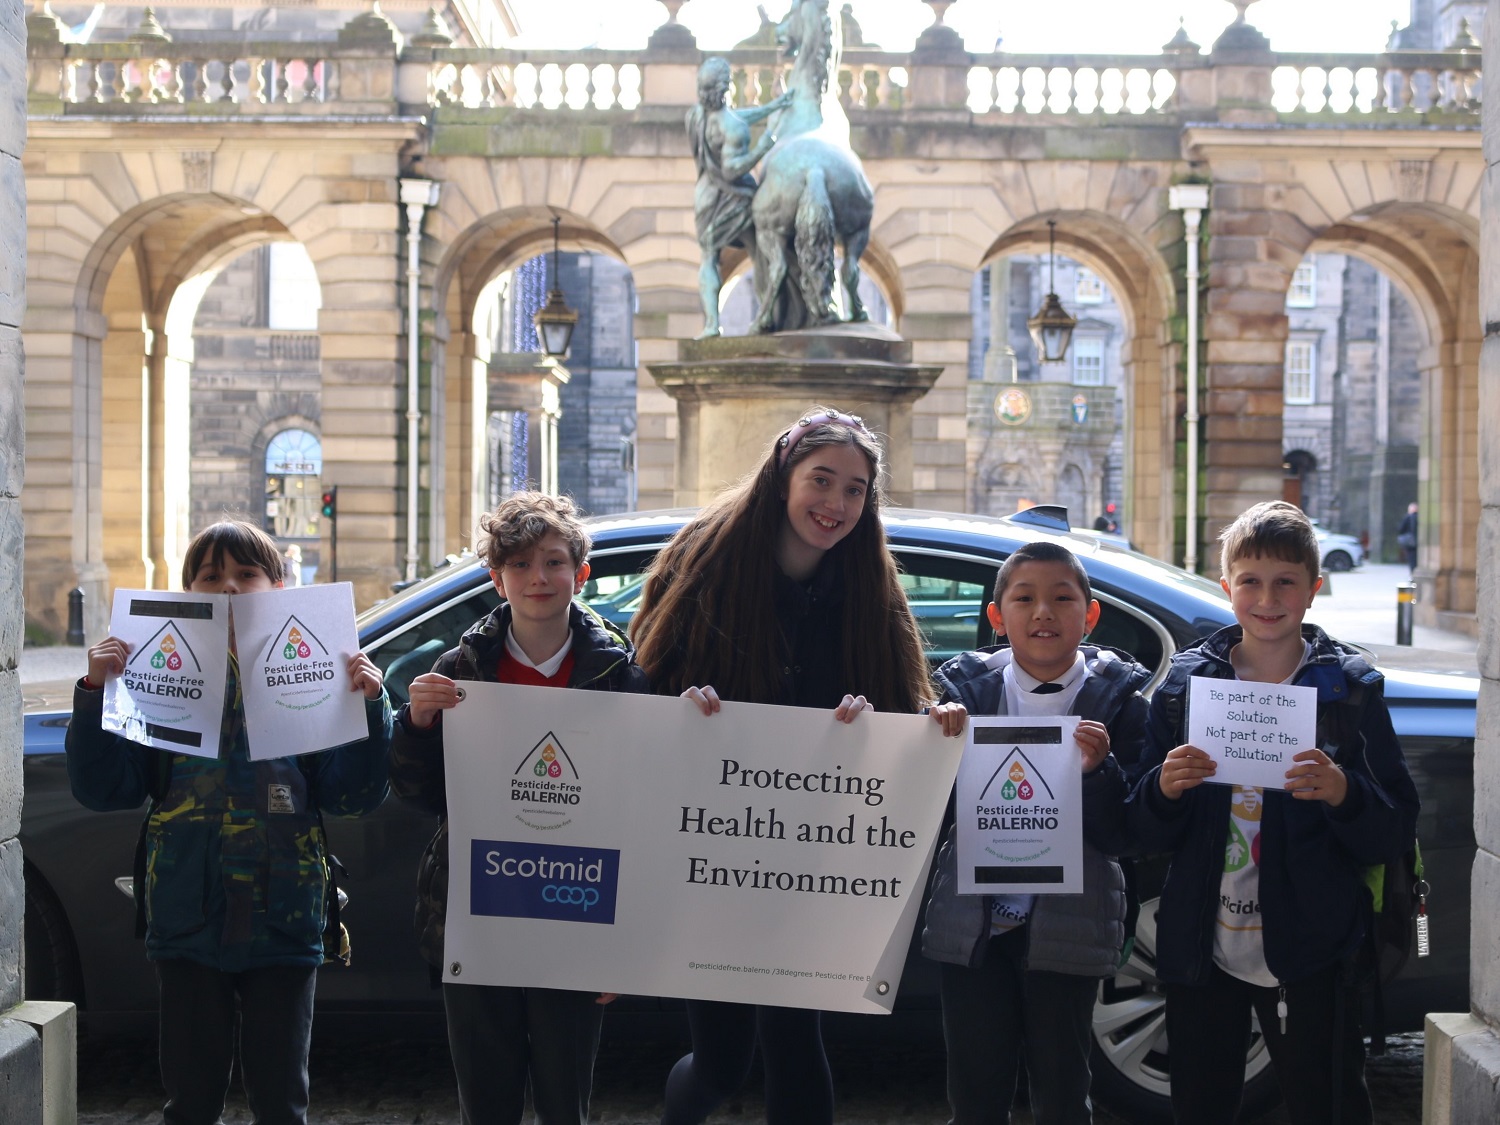 Campaigning to end the use of pesticides in Balerno, Edinburgh